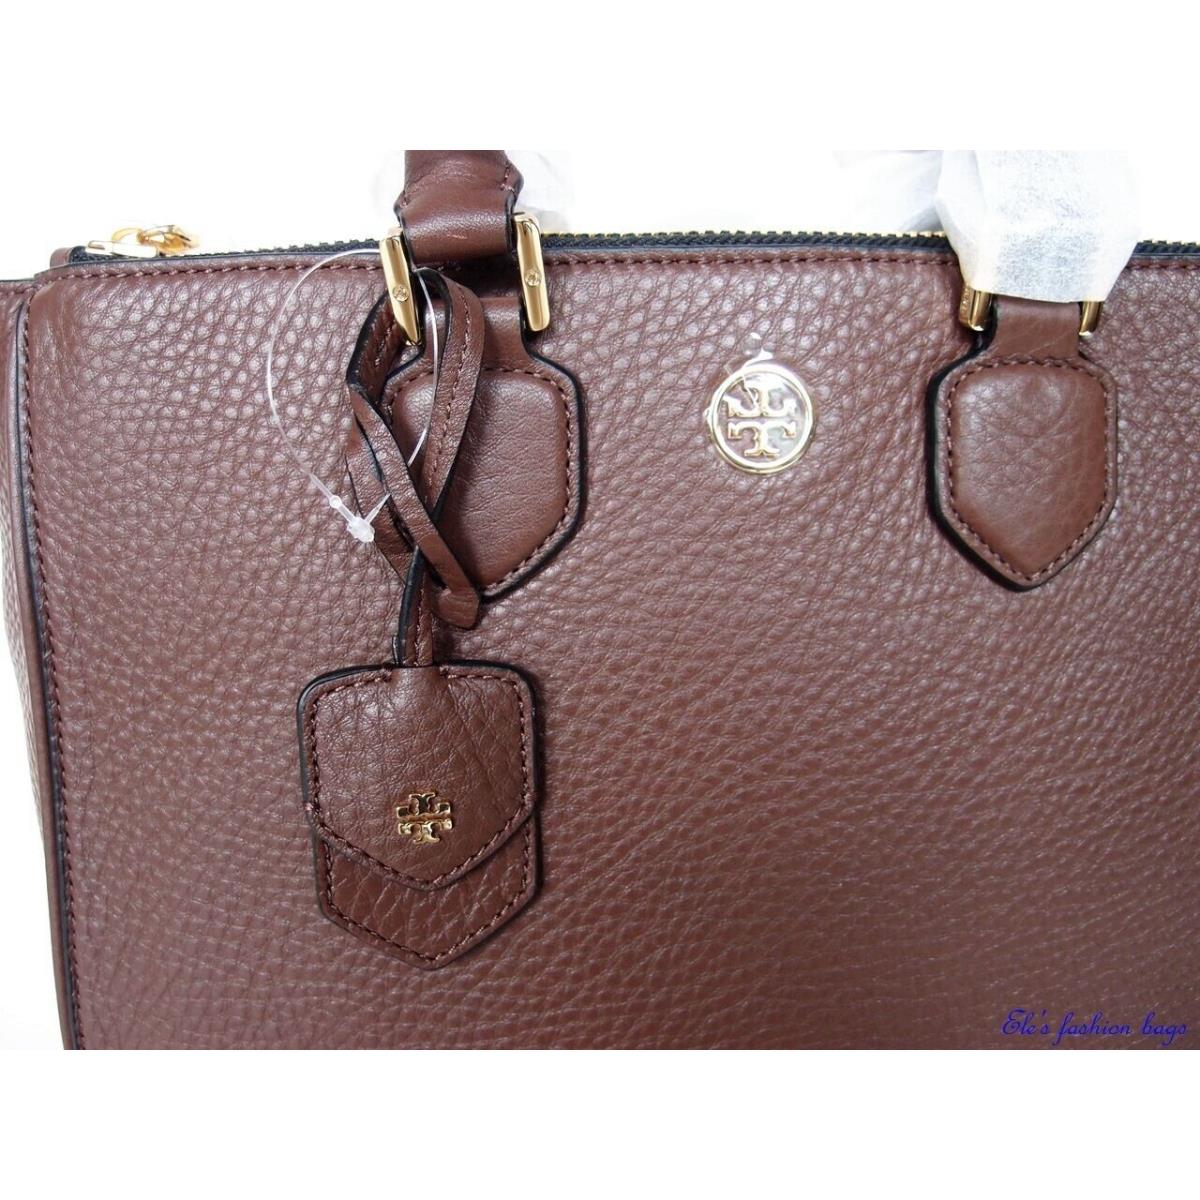 Tory Burch  bag   - Brown Lining, Brown Exterior, Gold Hardware 6